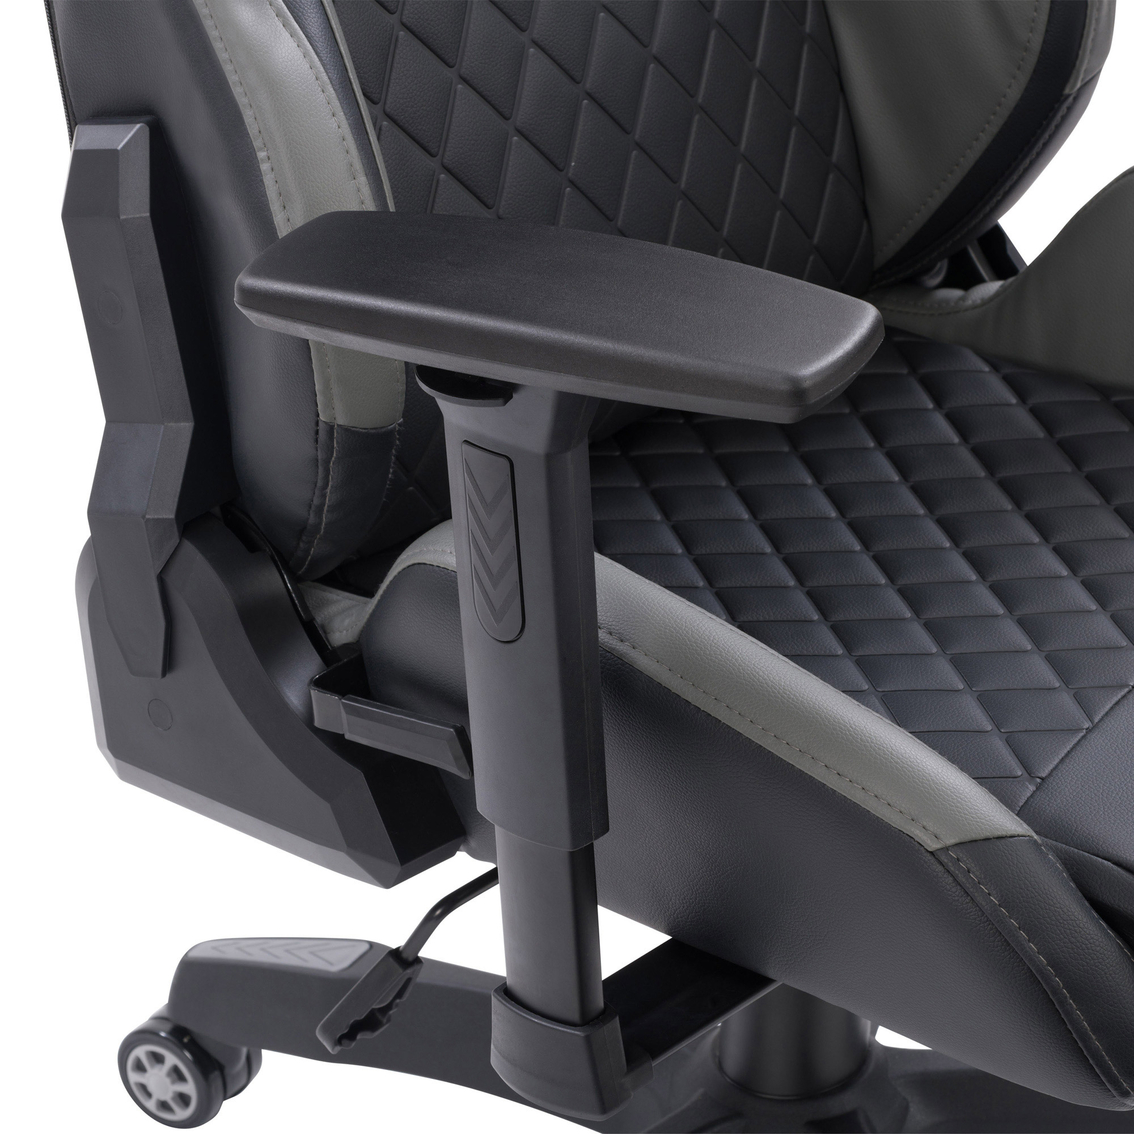 CorLiving Nightshade Gaming Chair - Image 5 of 8